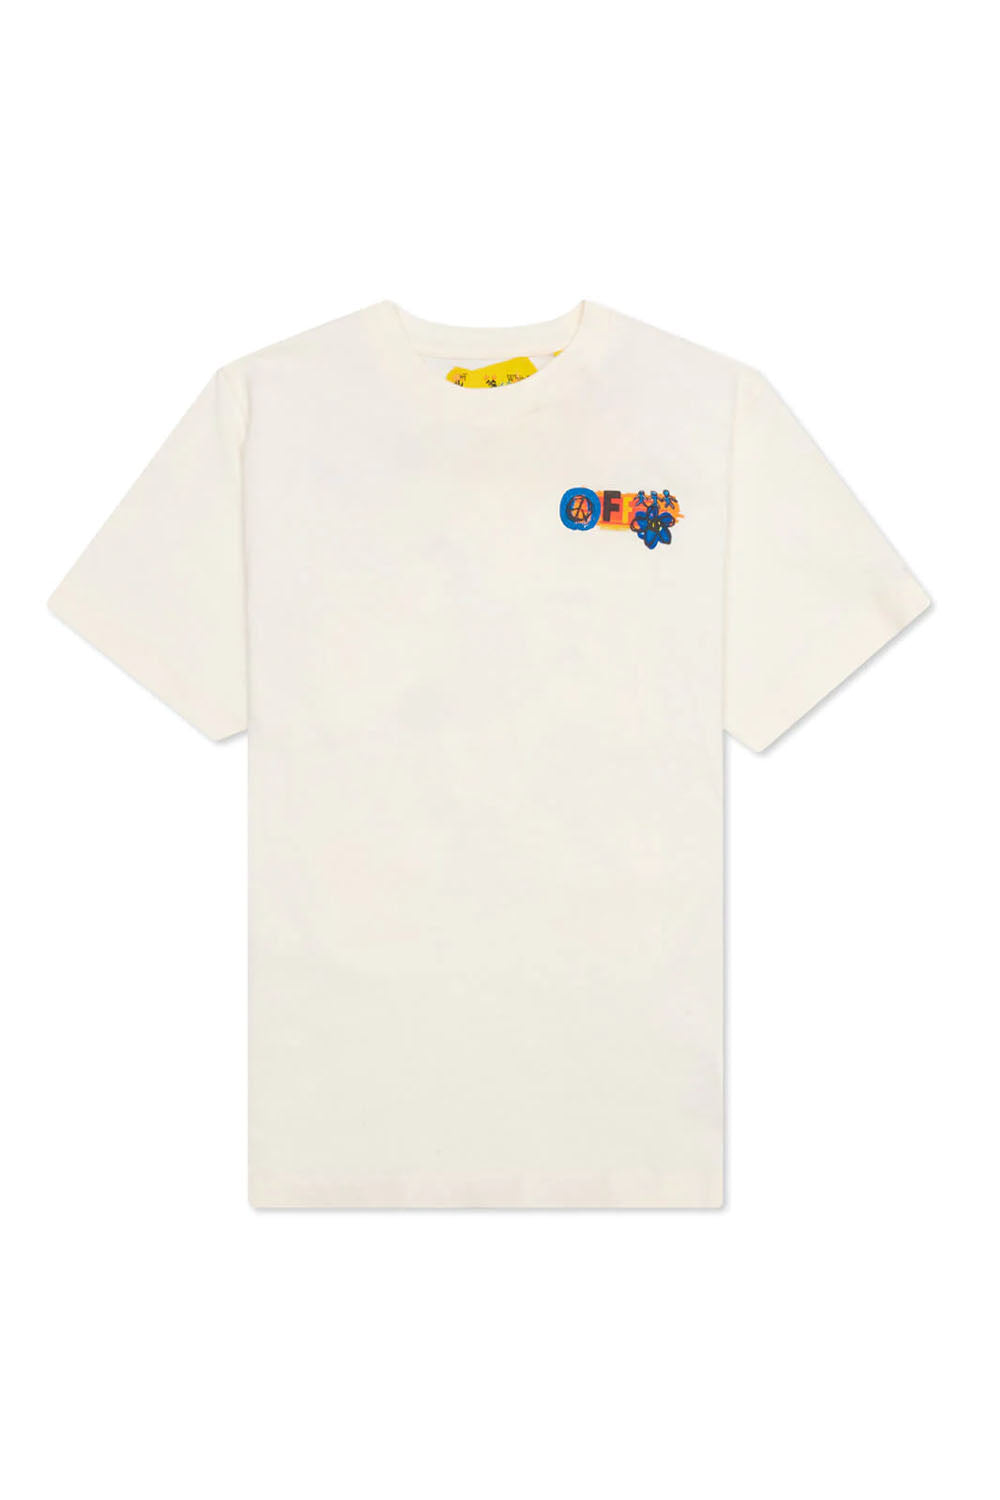 Ow Together T-Shirt for Boys - Maison7